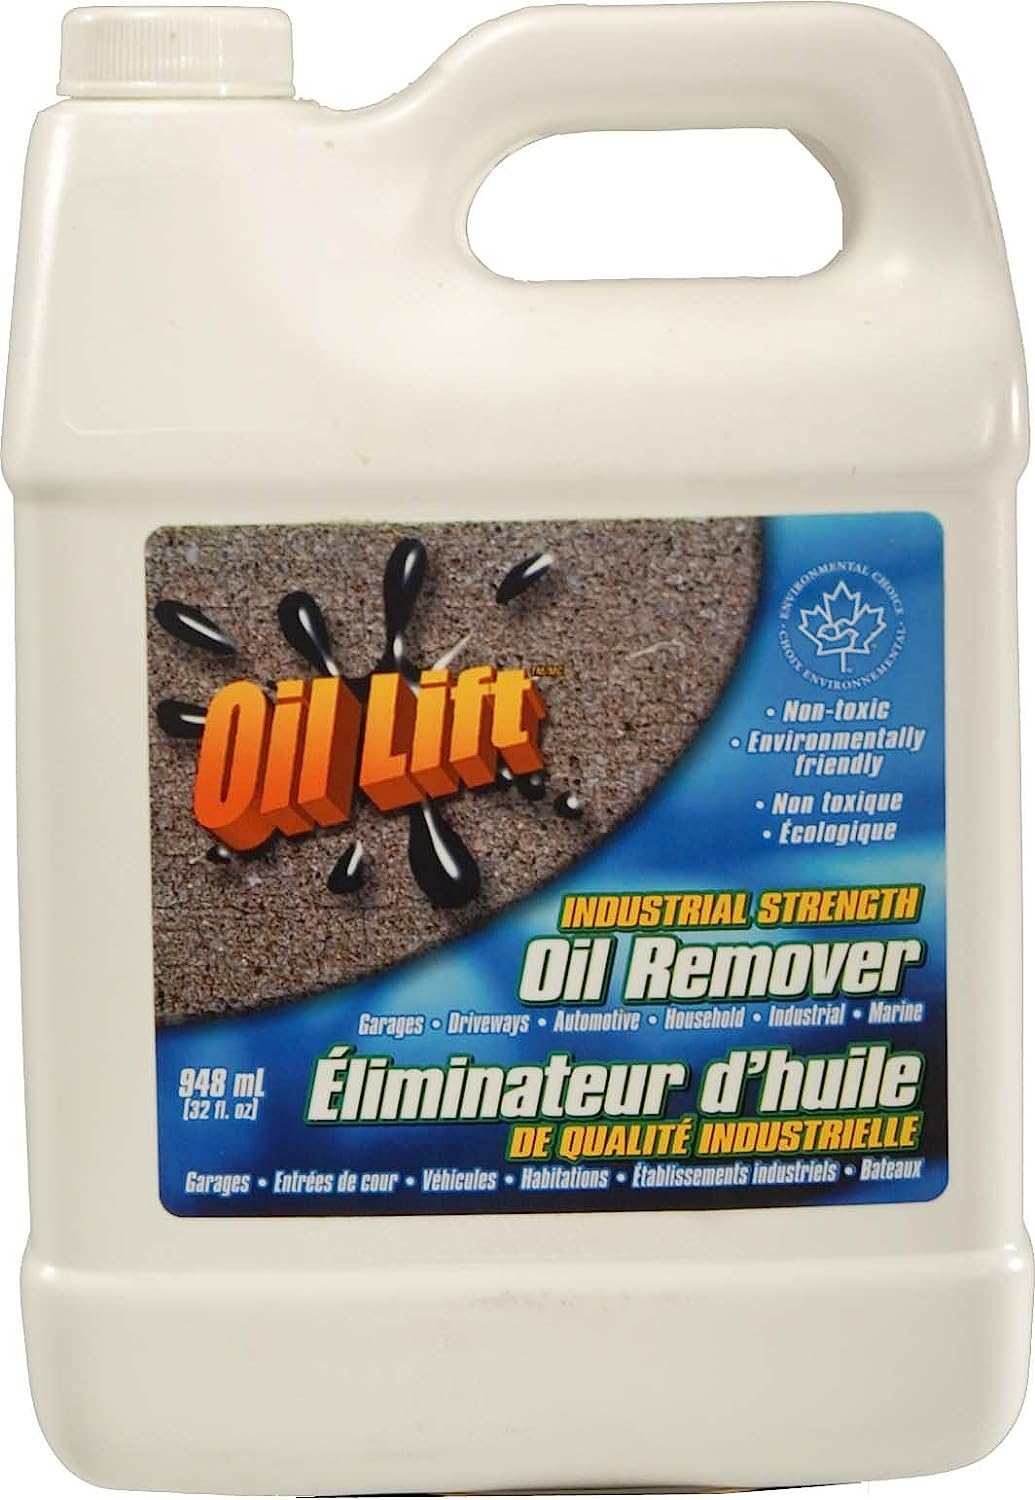 Oillift industrial strength concentrated Non toxic oil [...]